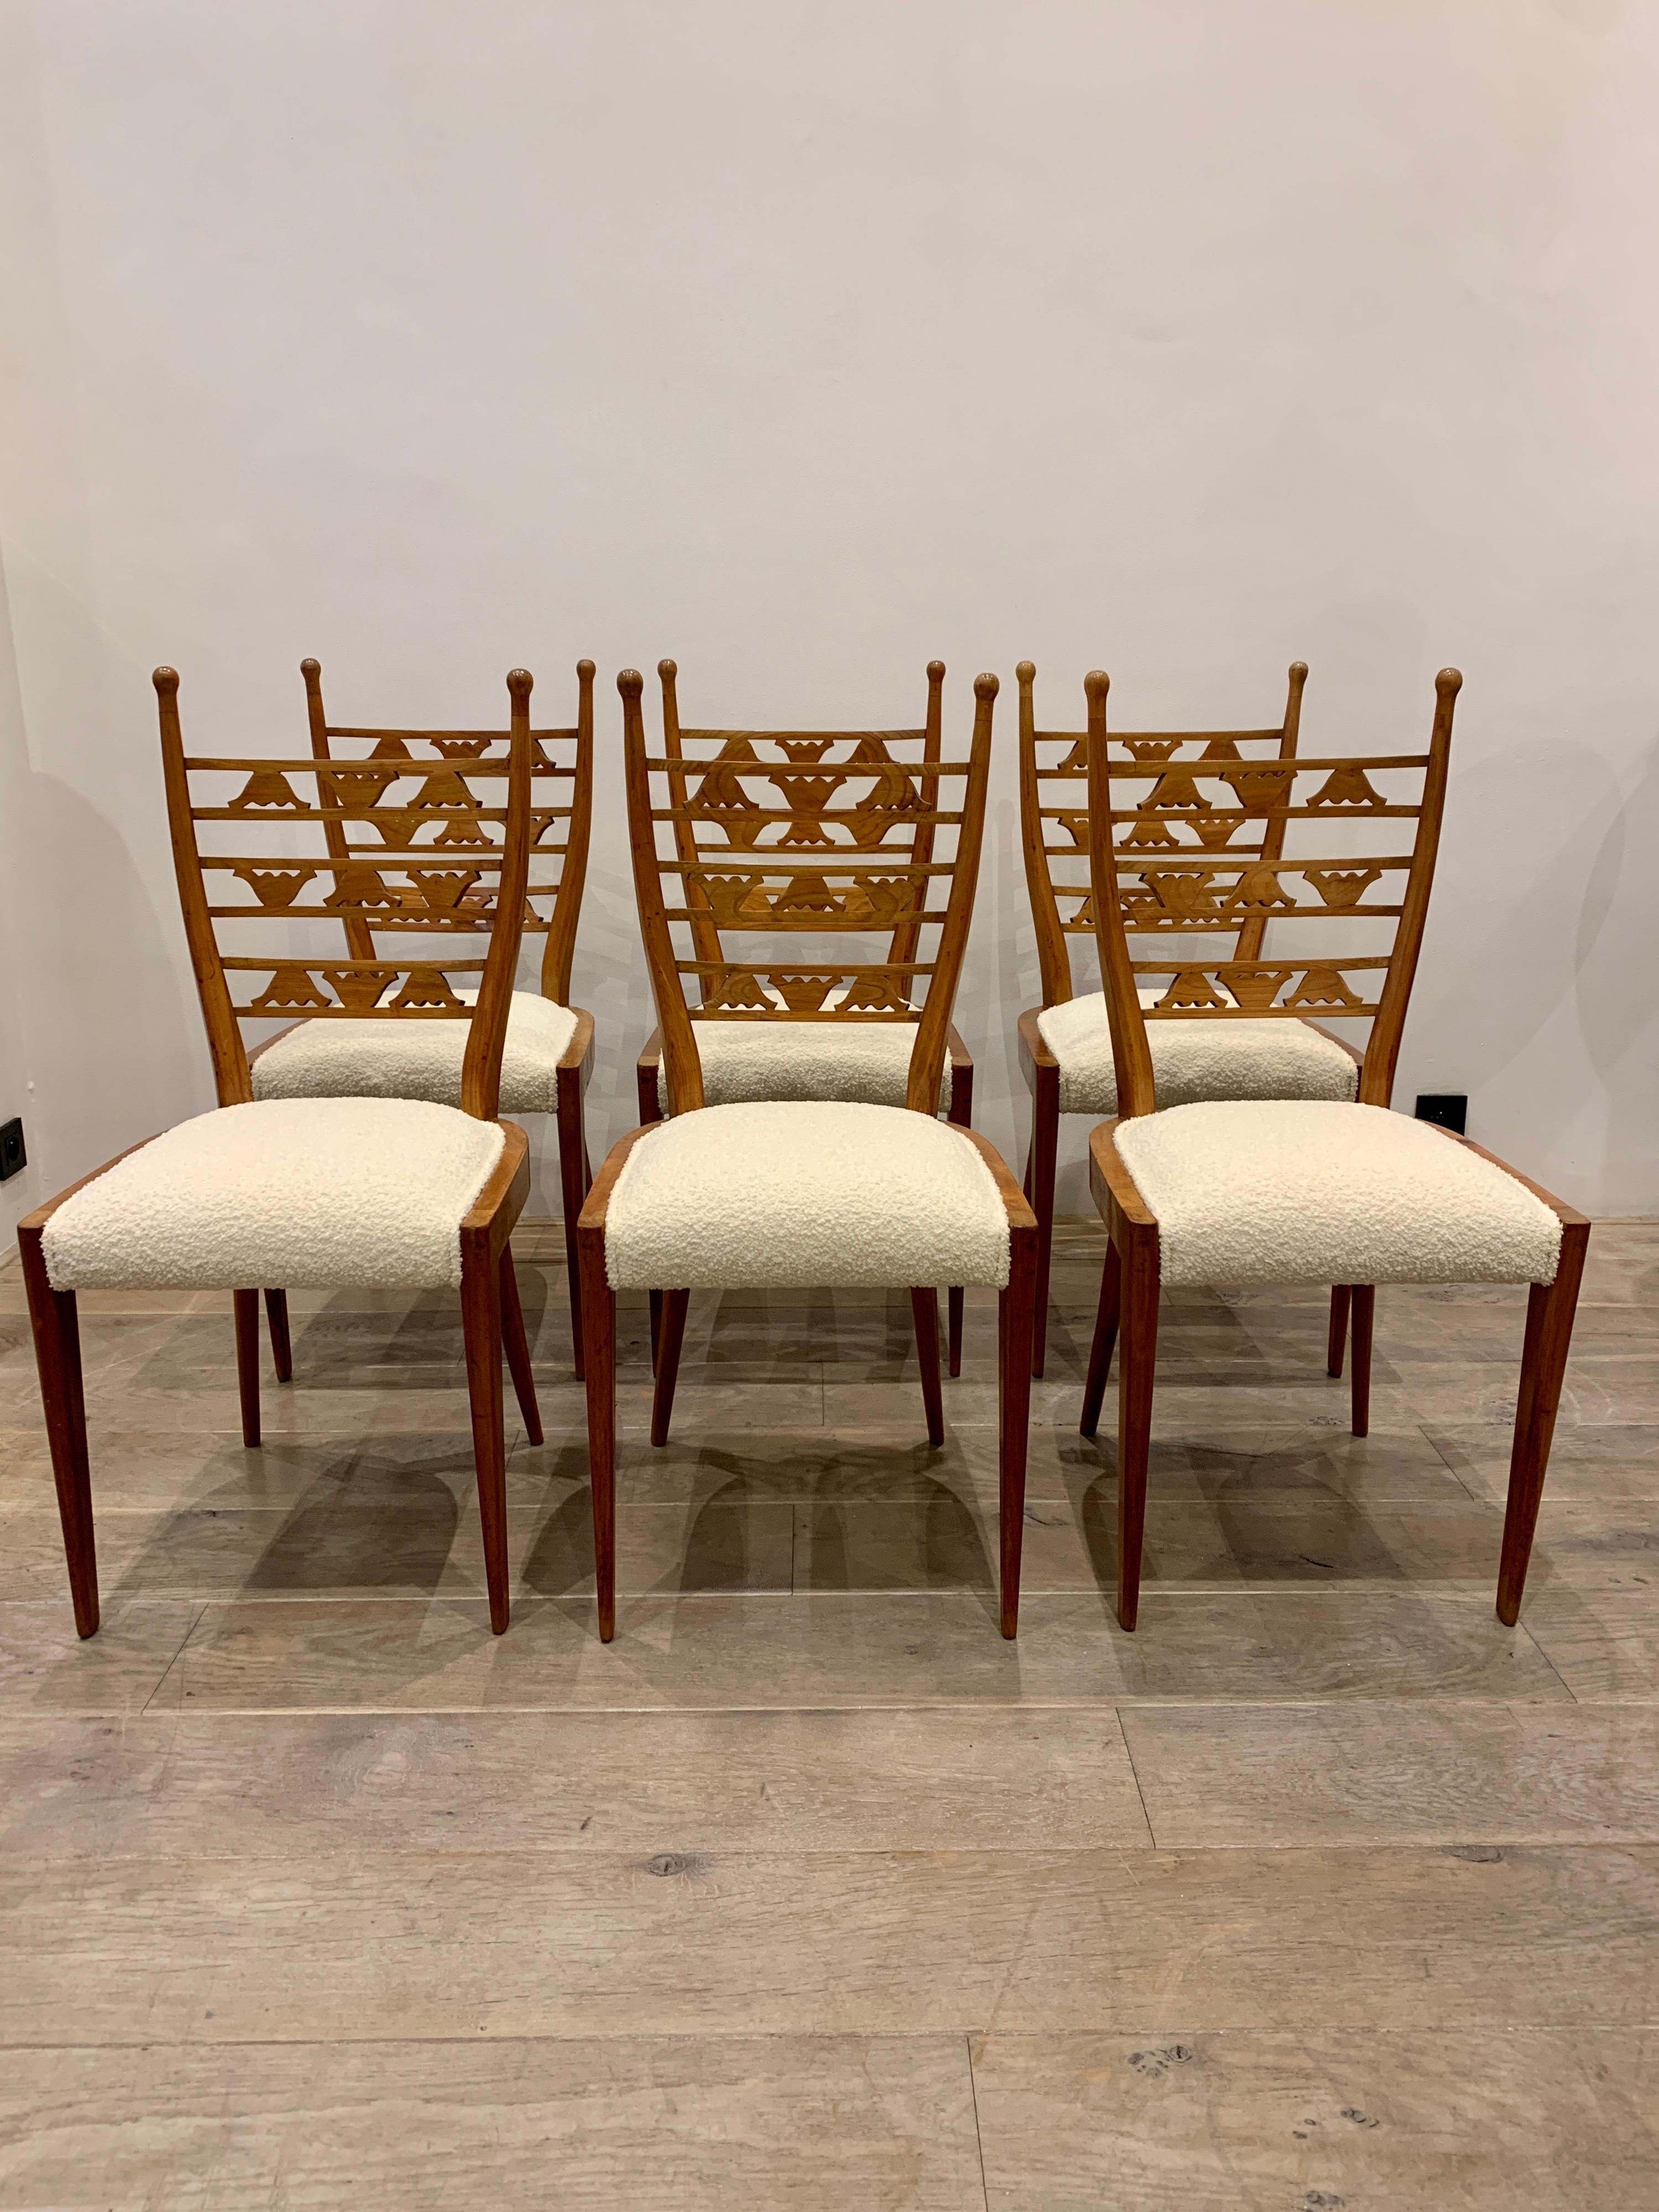 The chairs with their decorative high back are very elegant. They are clearly in the style of the Great Italian designer Paolo Buffa. Buffa created some decorative chairs with emphasis on the back where he would creates particular decorative designs